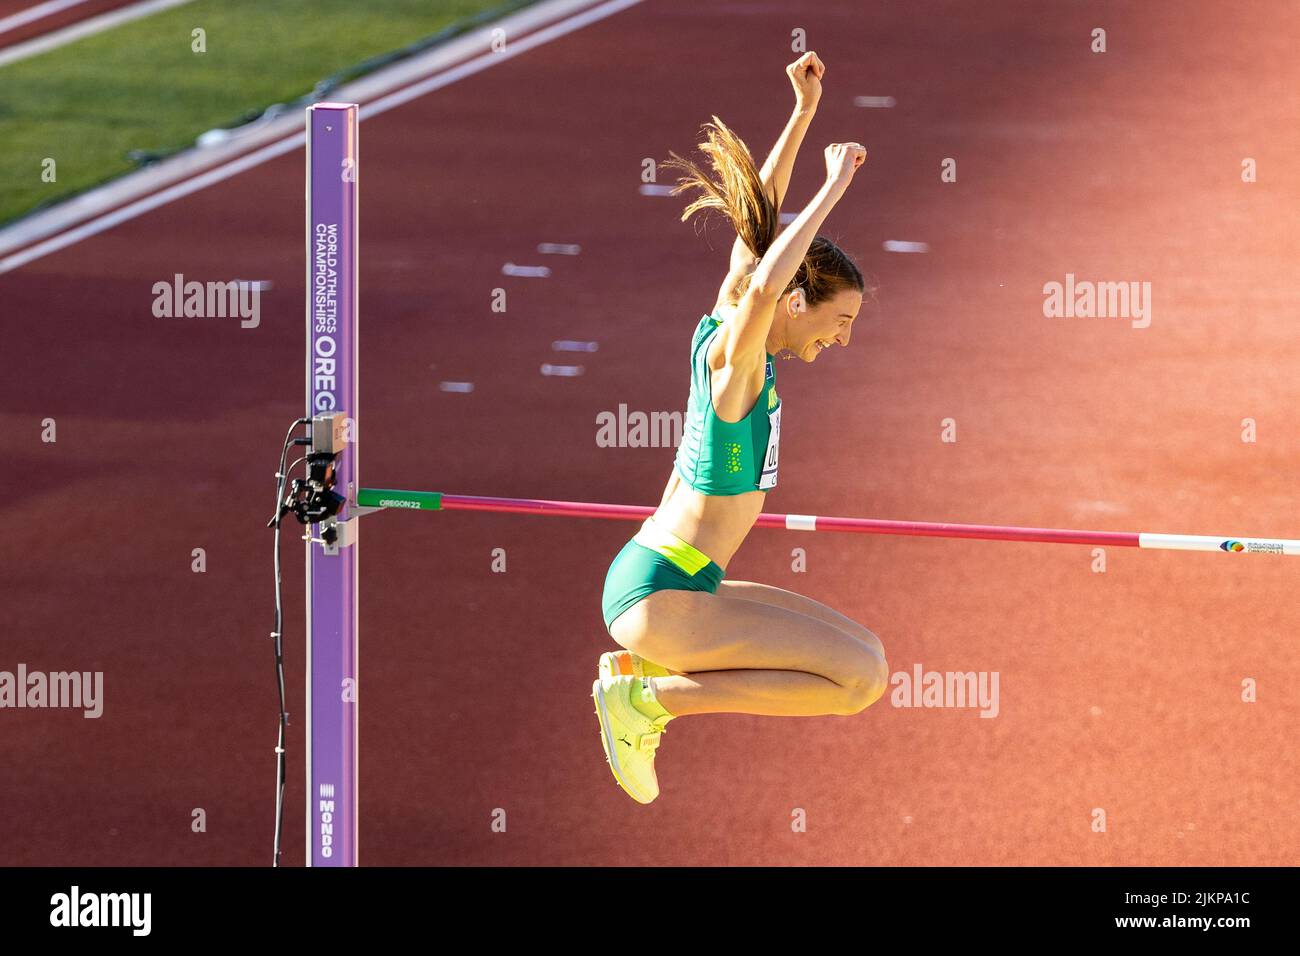 Nicola Olyslagers (AUS) celebrates a clearance of a season best jump of 6-5 (1.96) in the high jump final during the afternoon session on day 5 of the Stock Photo